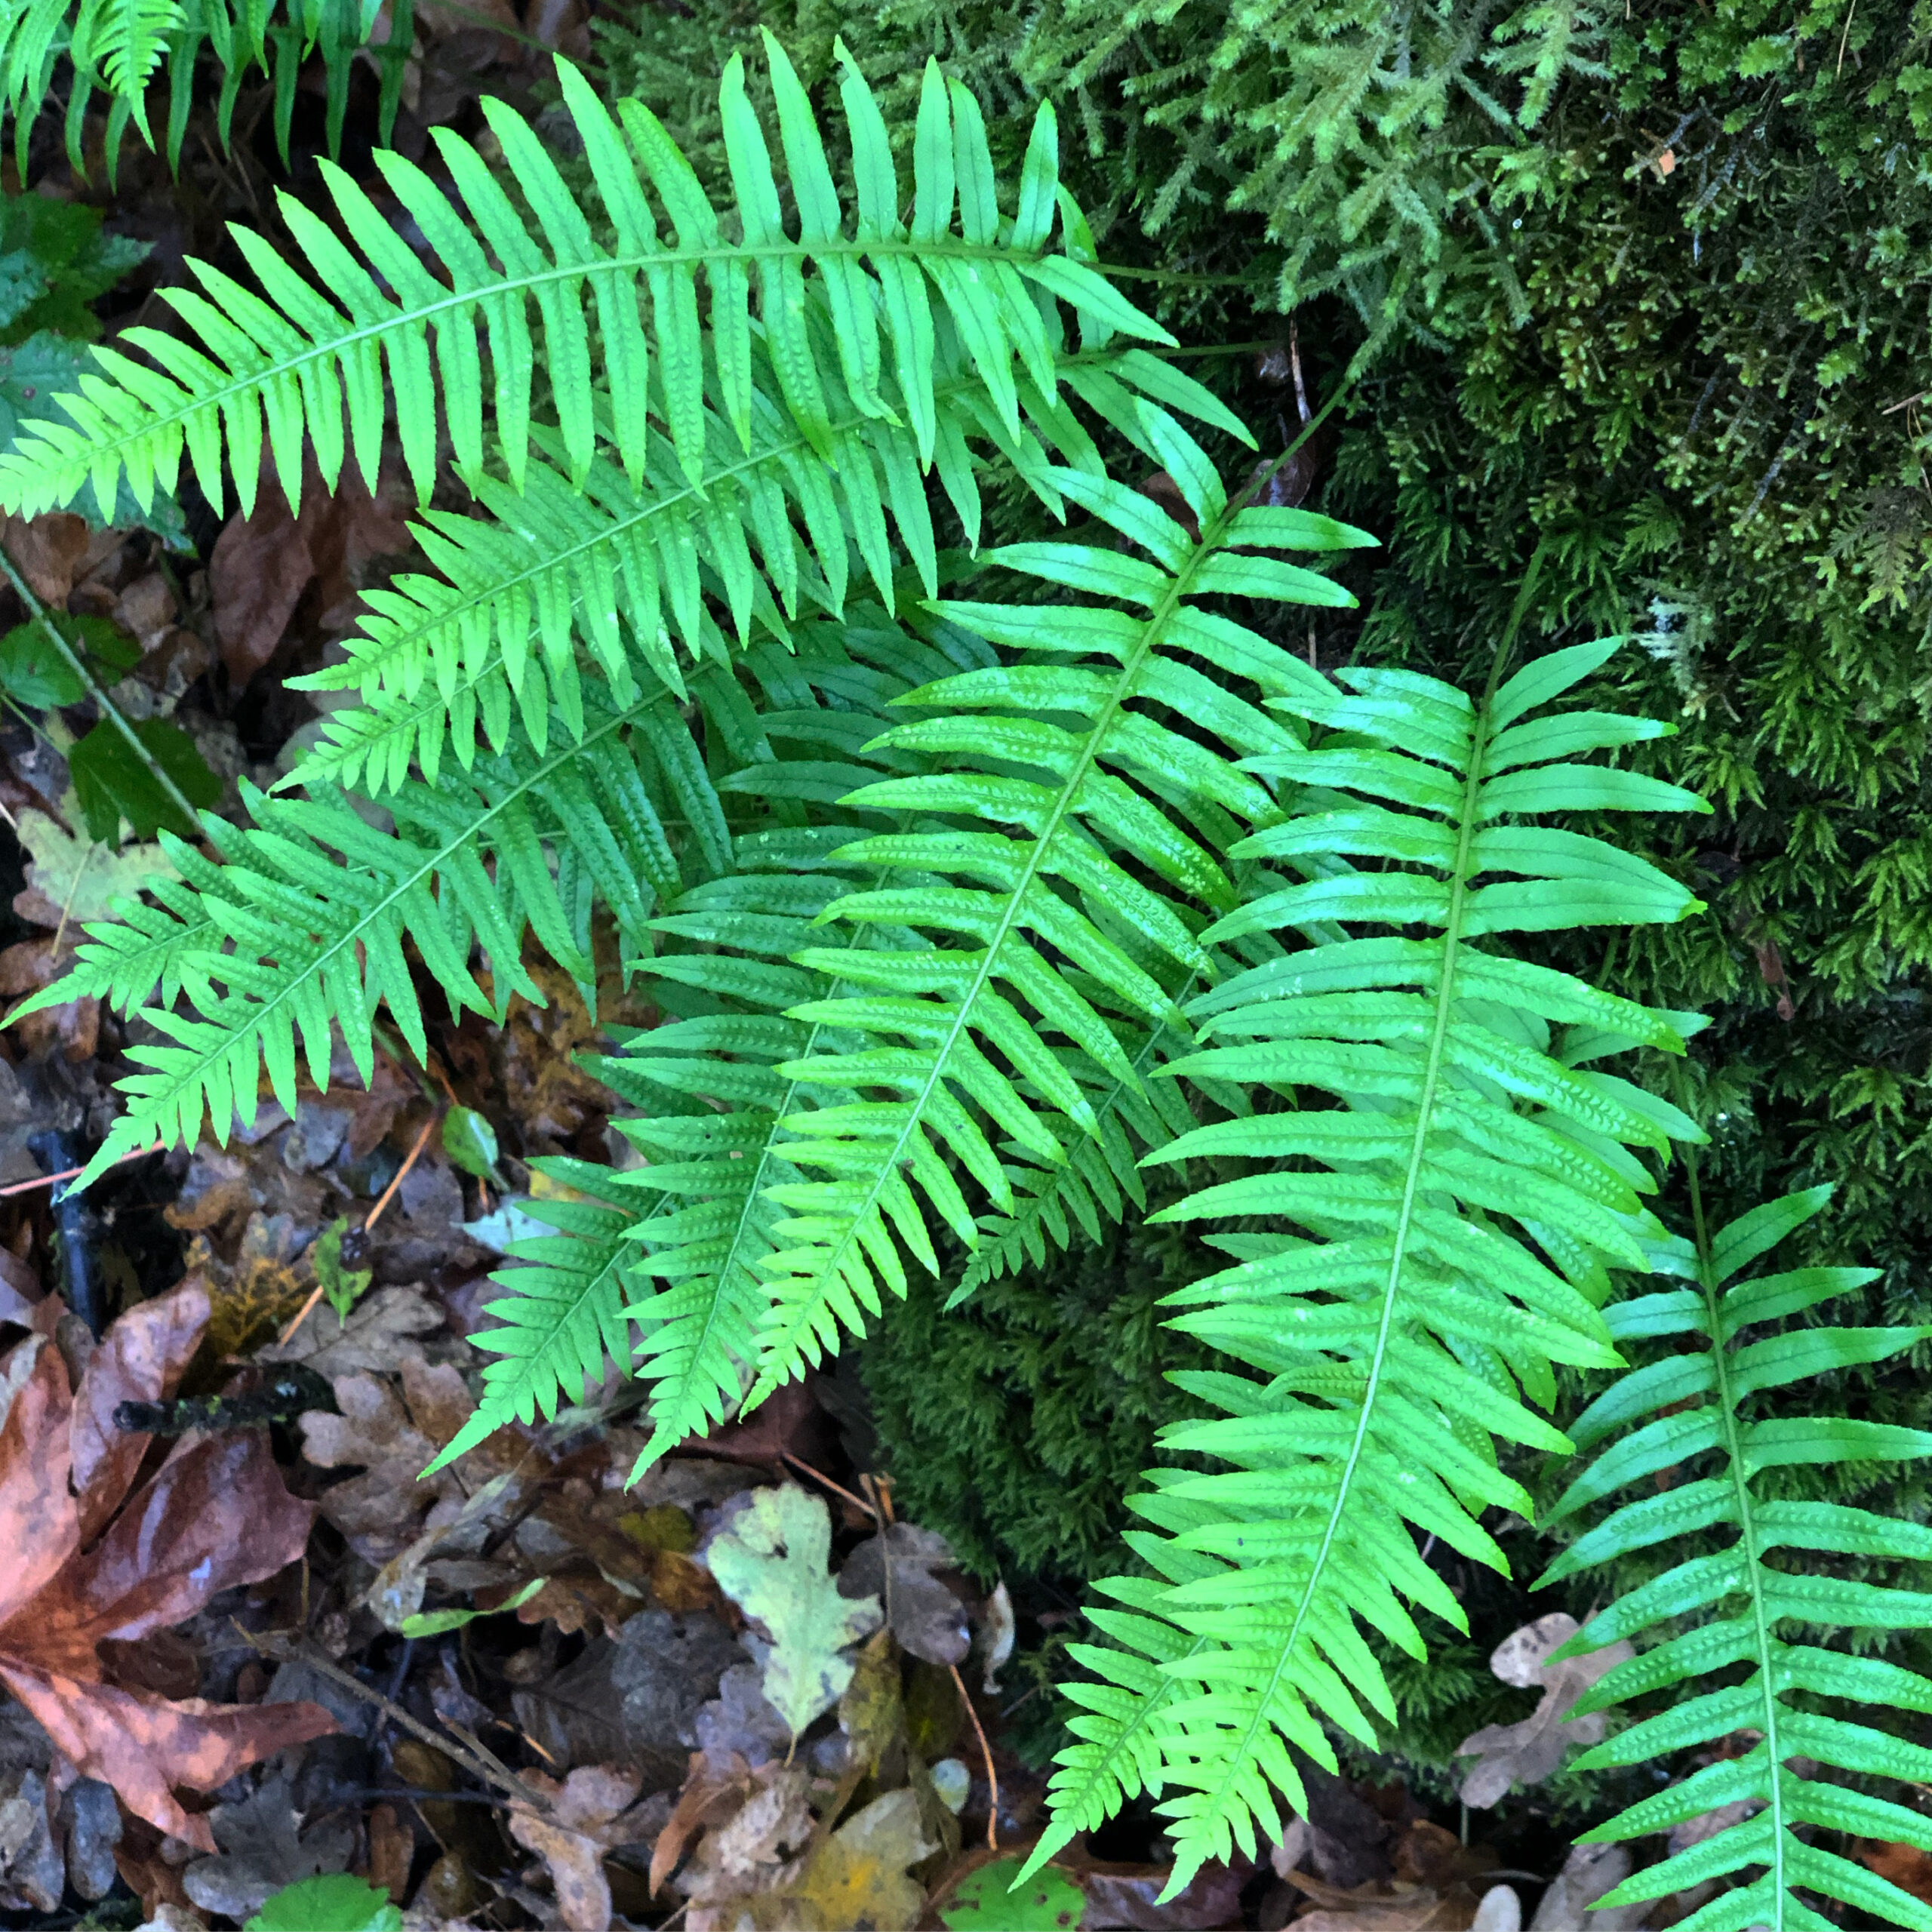 Get to know:  Licorice Fern